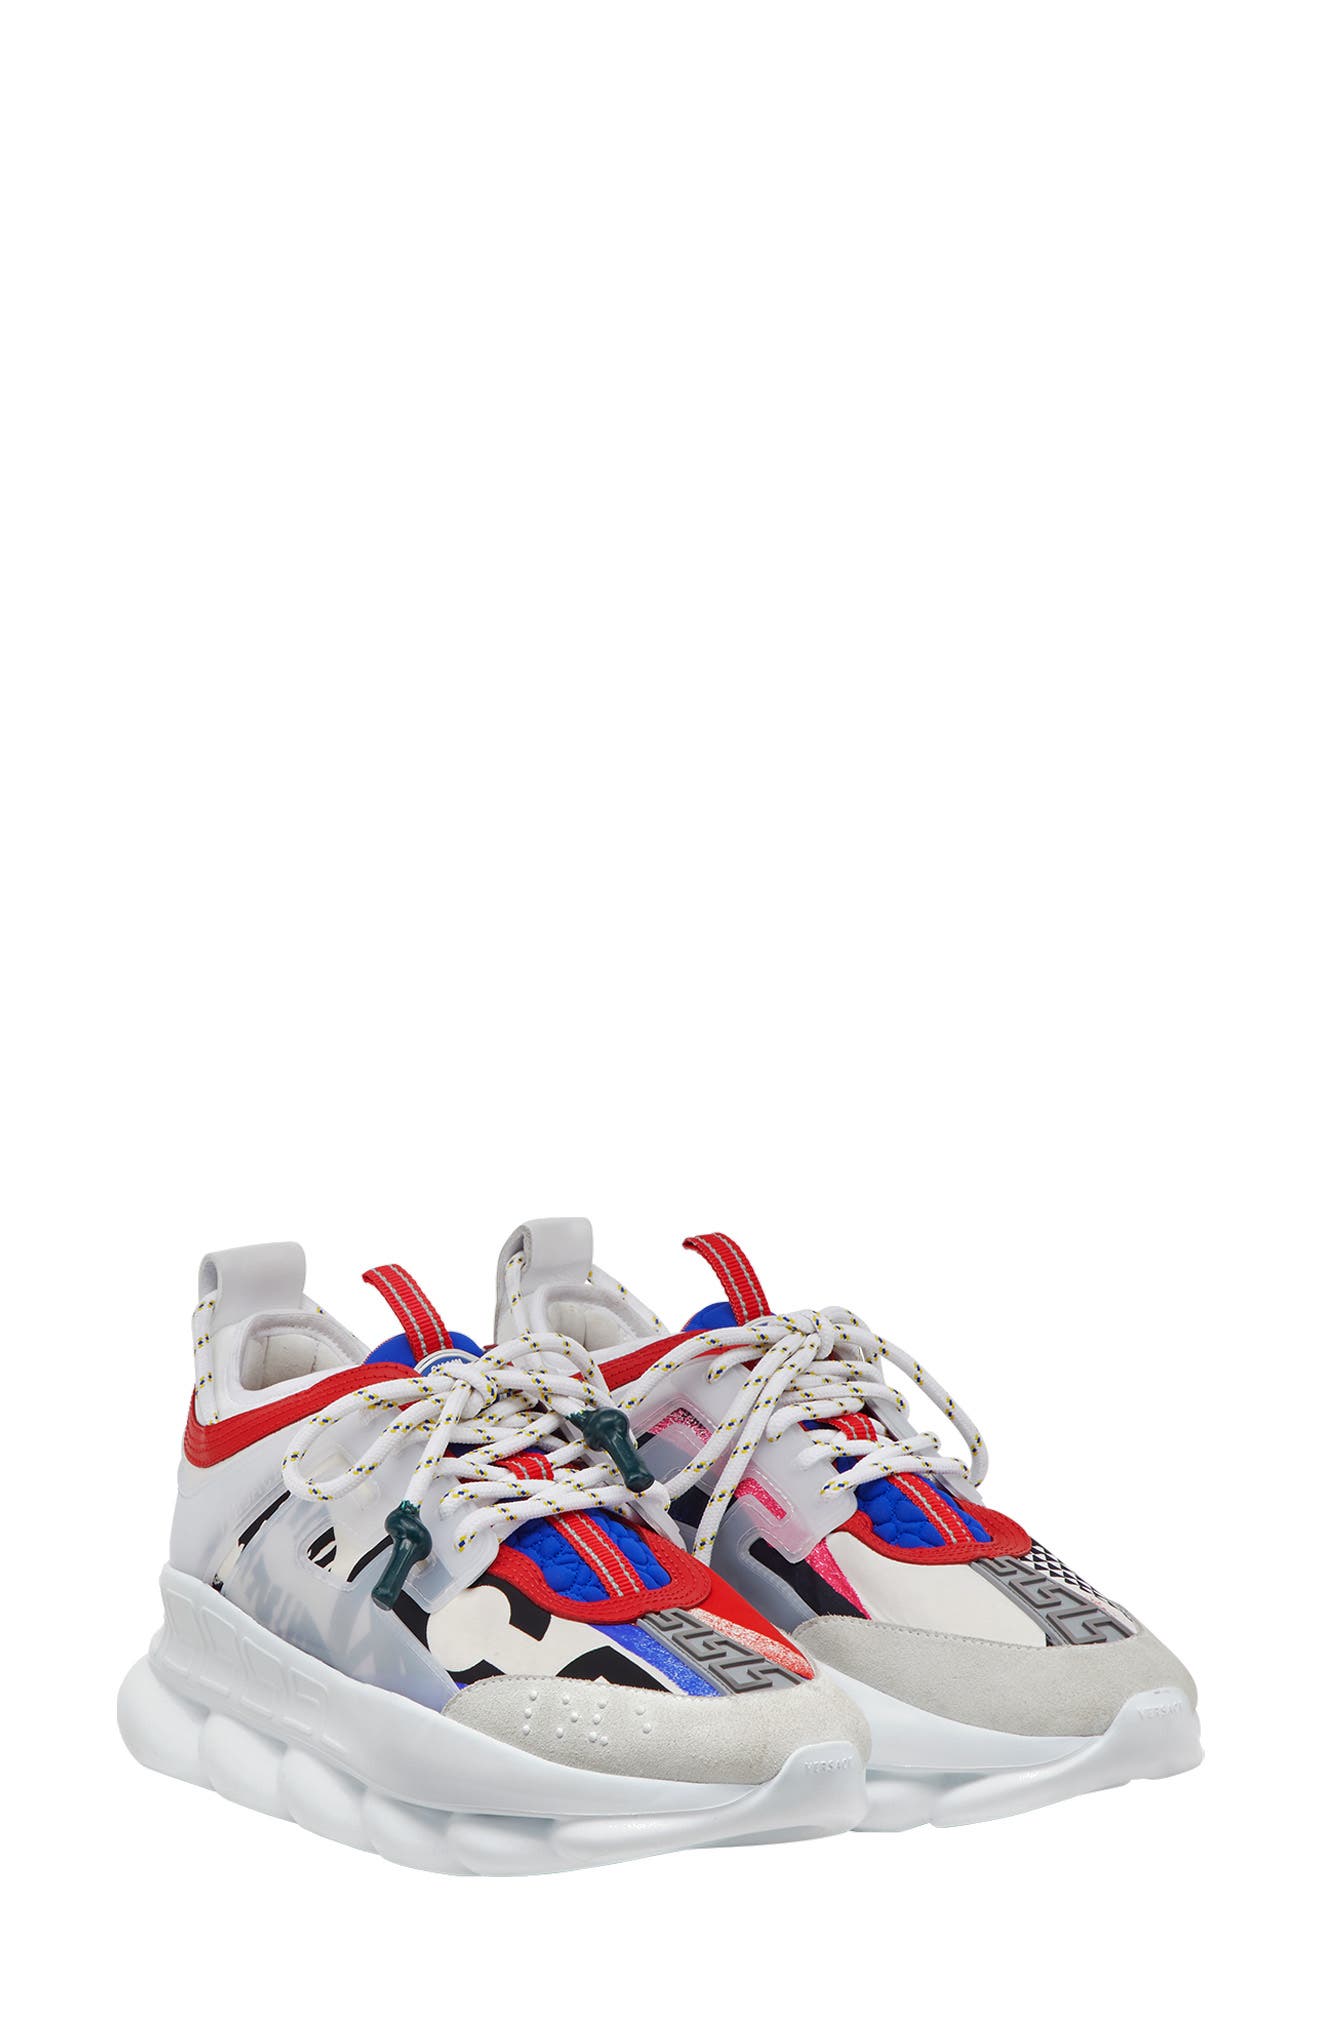 gucci chain reaction sneakers